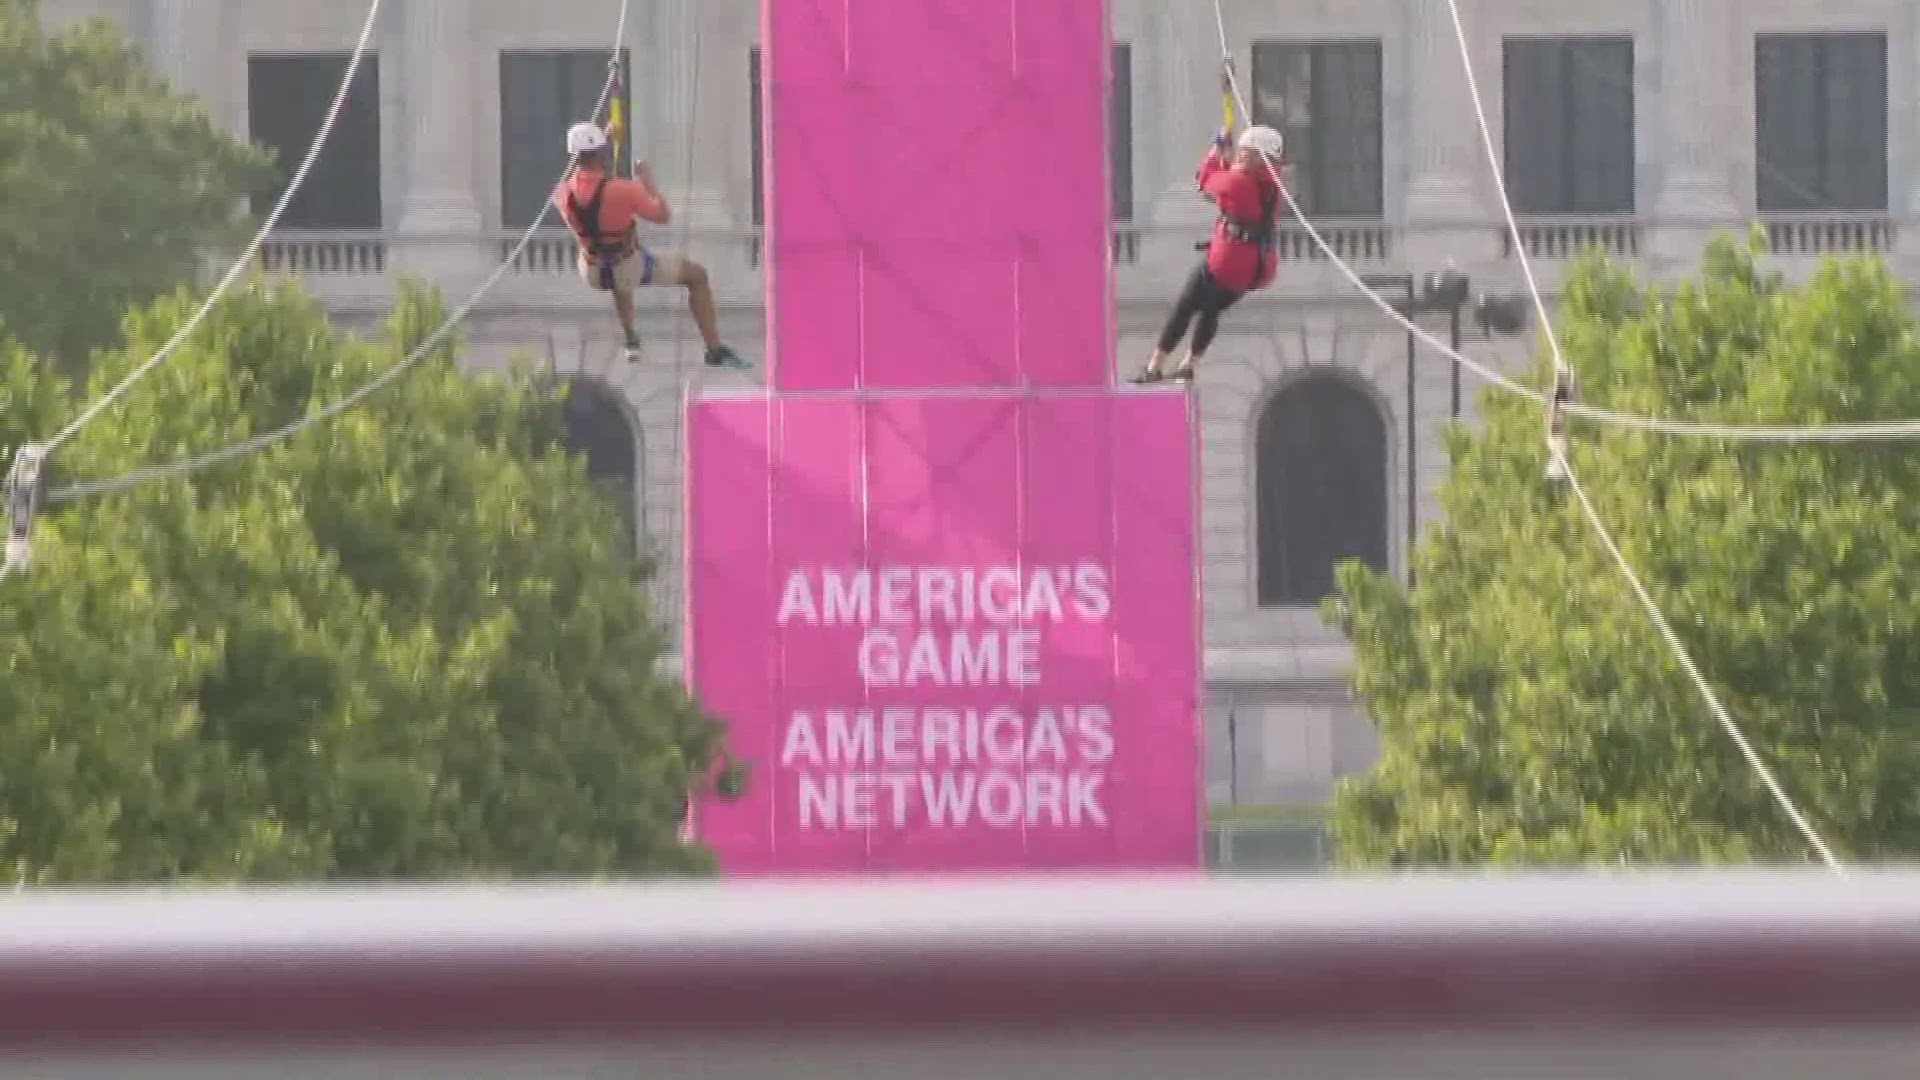 July 5, 2019: Ziplines are one of the features at the 2019 PLAY BALL Park in Cleveland. We sent Michael Estime and Lindsay Buckingham over to check it out.